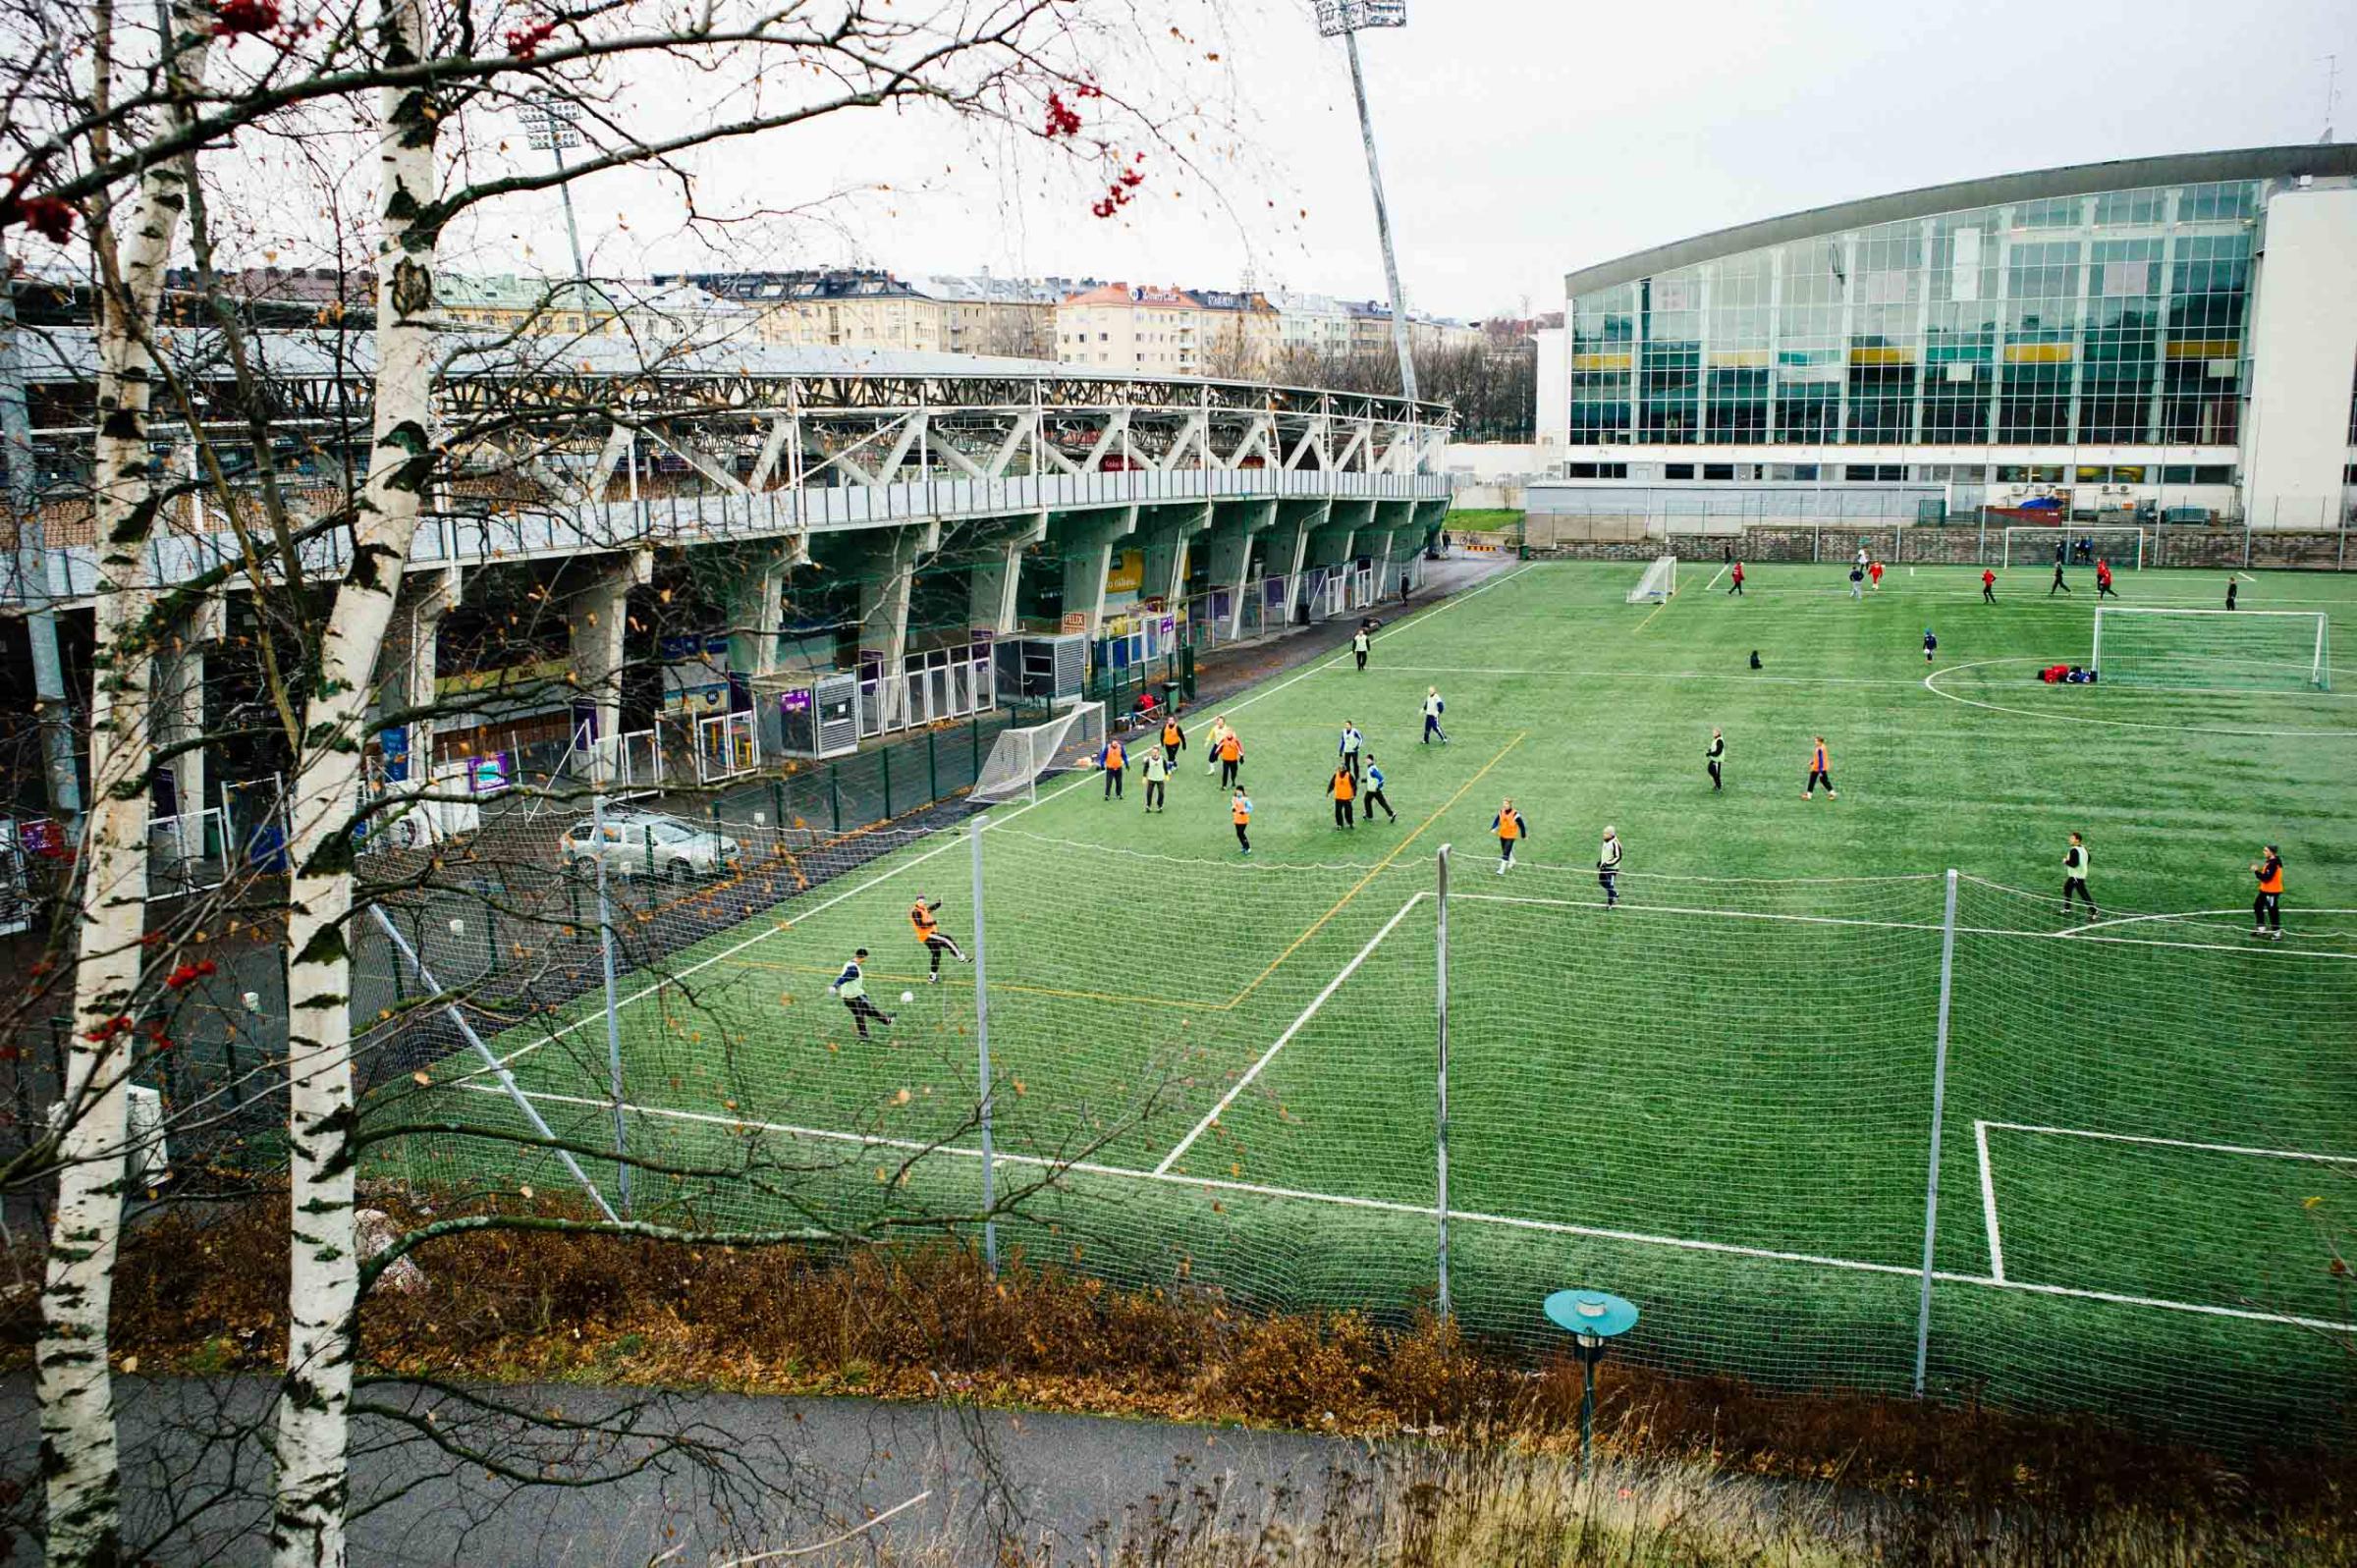 A soccer field as seen from the Olympic stadium in Helsinki, host of the 1952 Summer Olympics, photographed in November 2012.